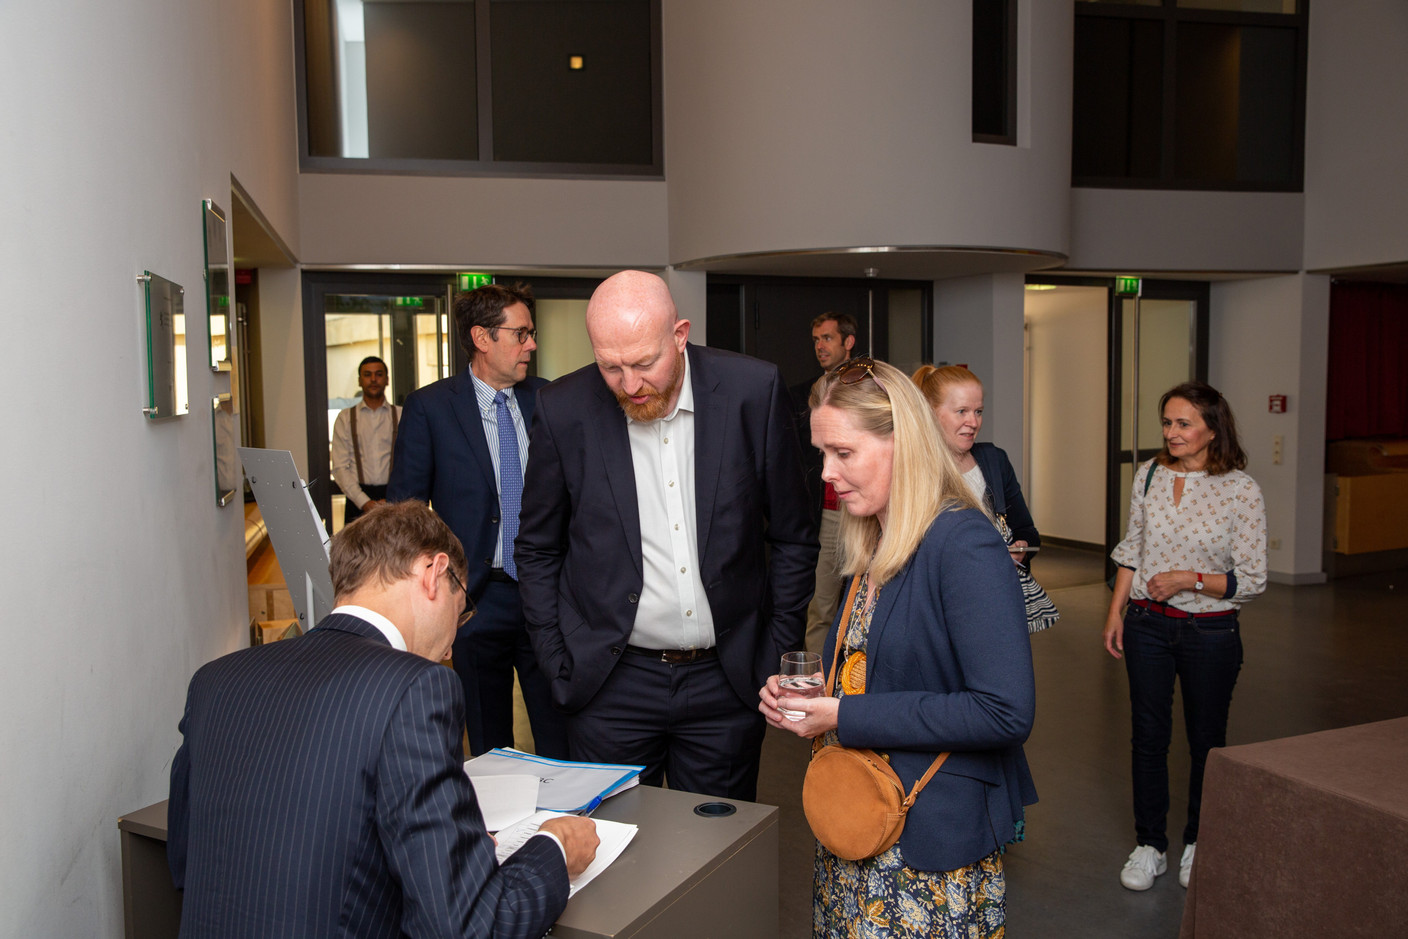 Guests arriving for the lecture Photo: Romain Gamba / Maison Moderne